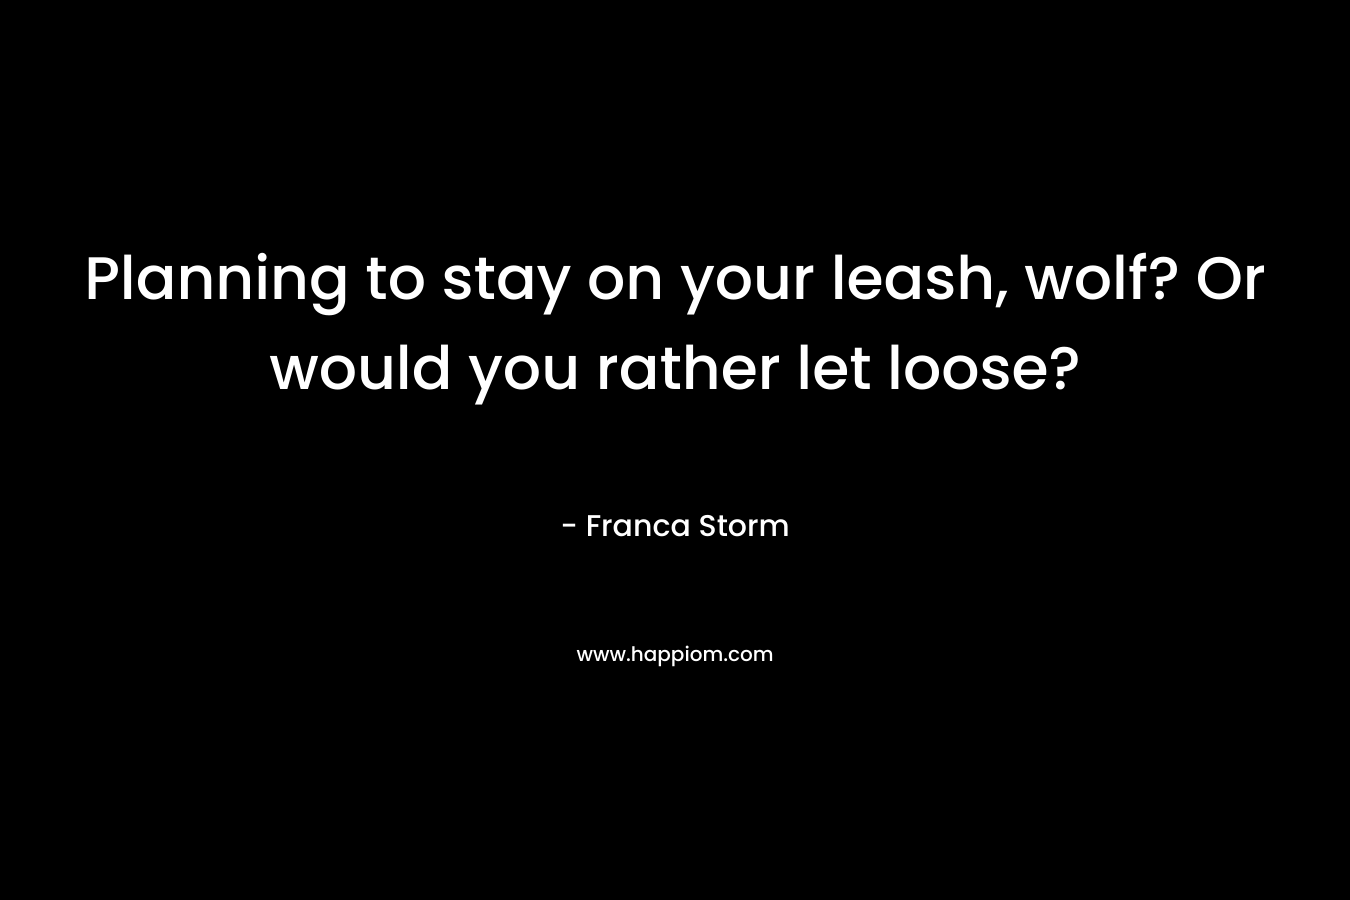 Planning to stay on your leash, wolf? Or would you rather let loose?